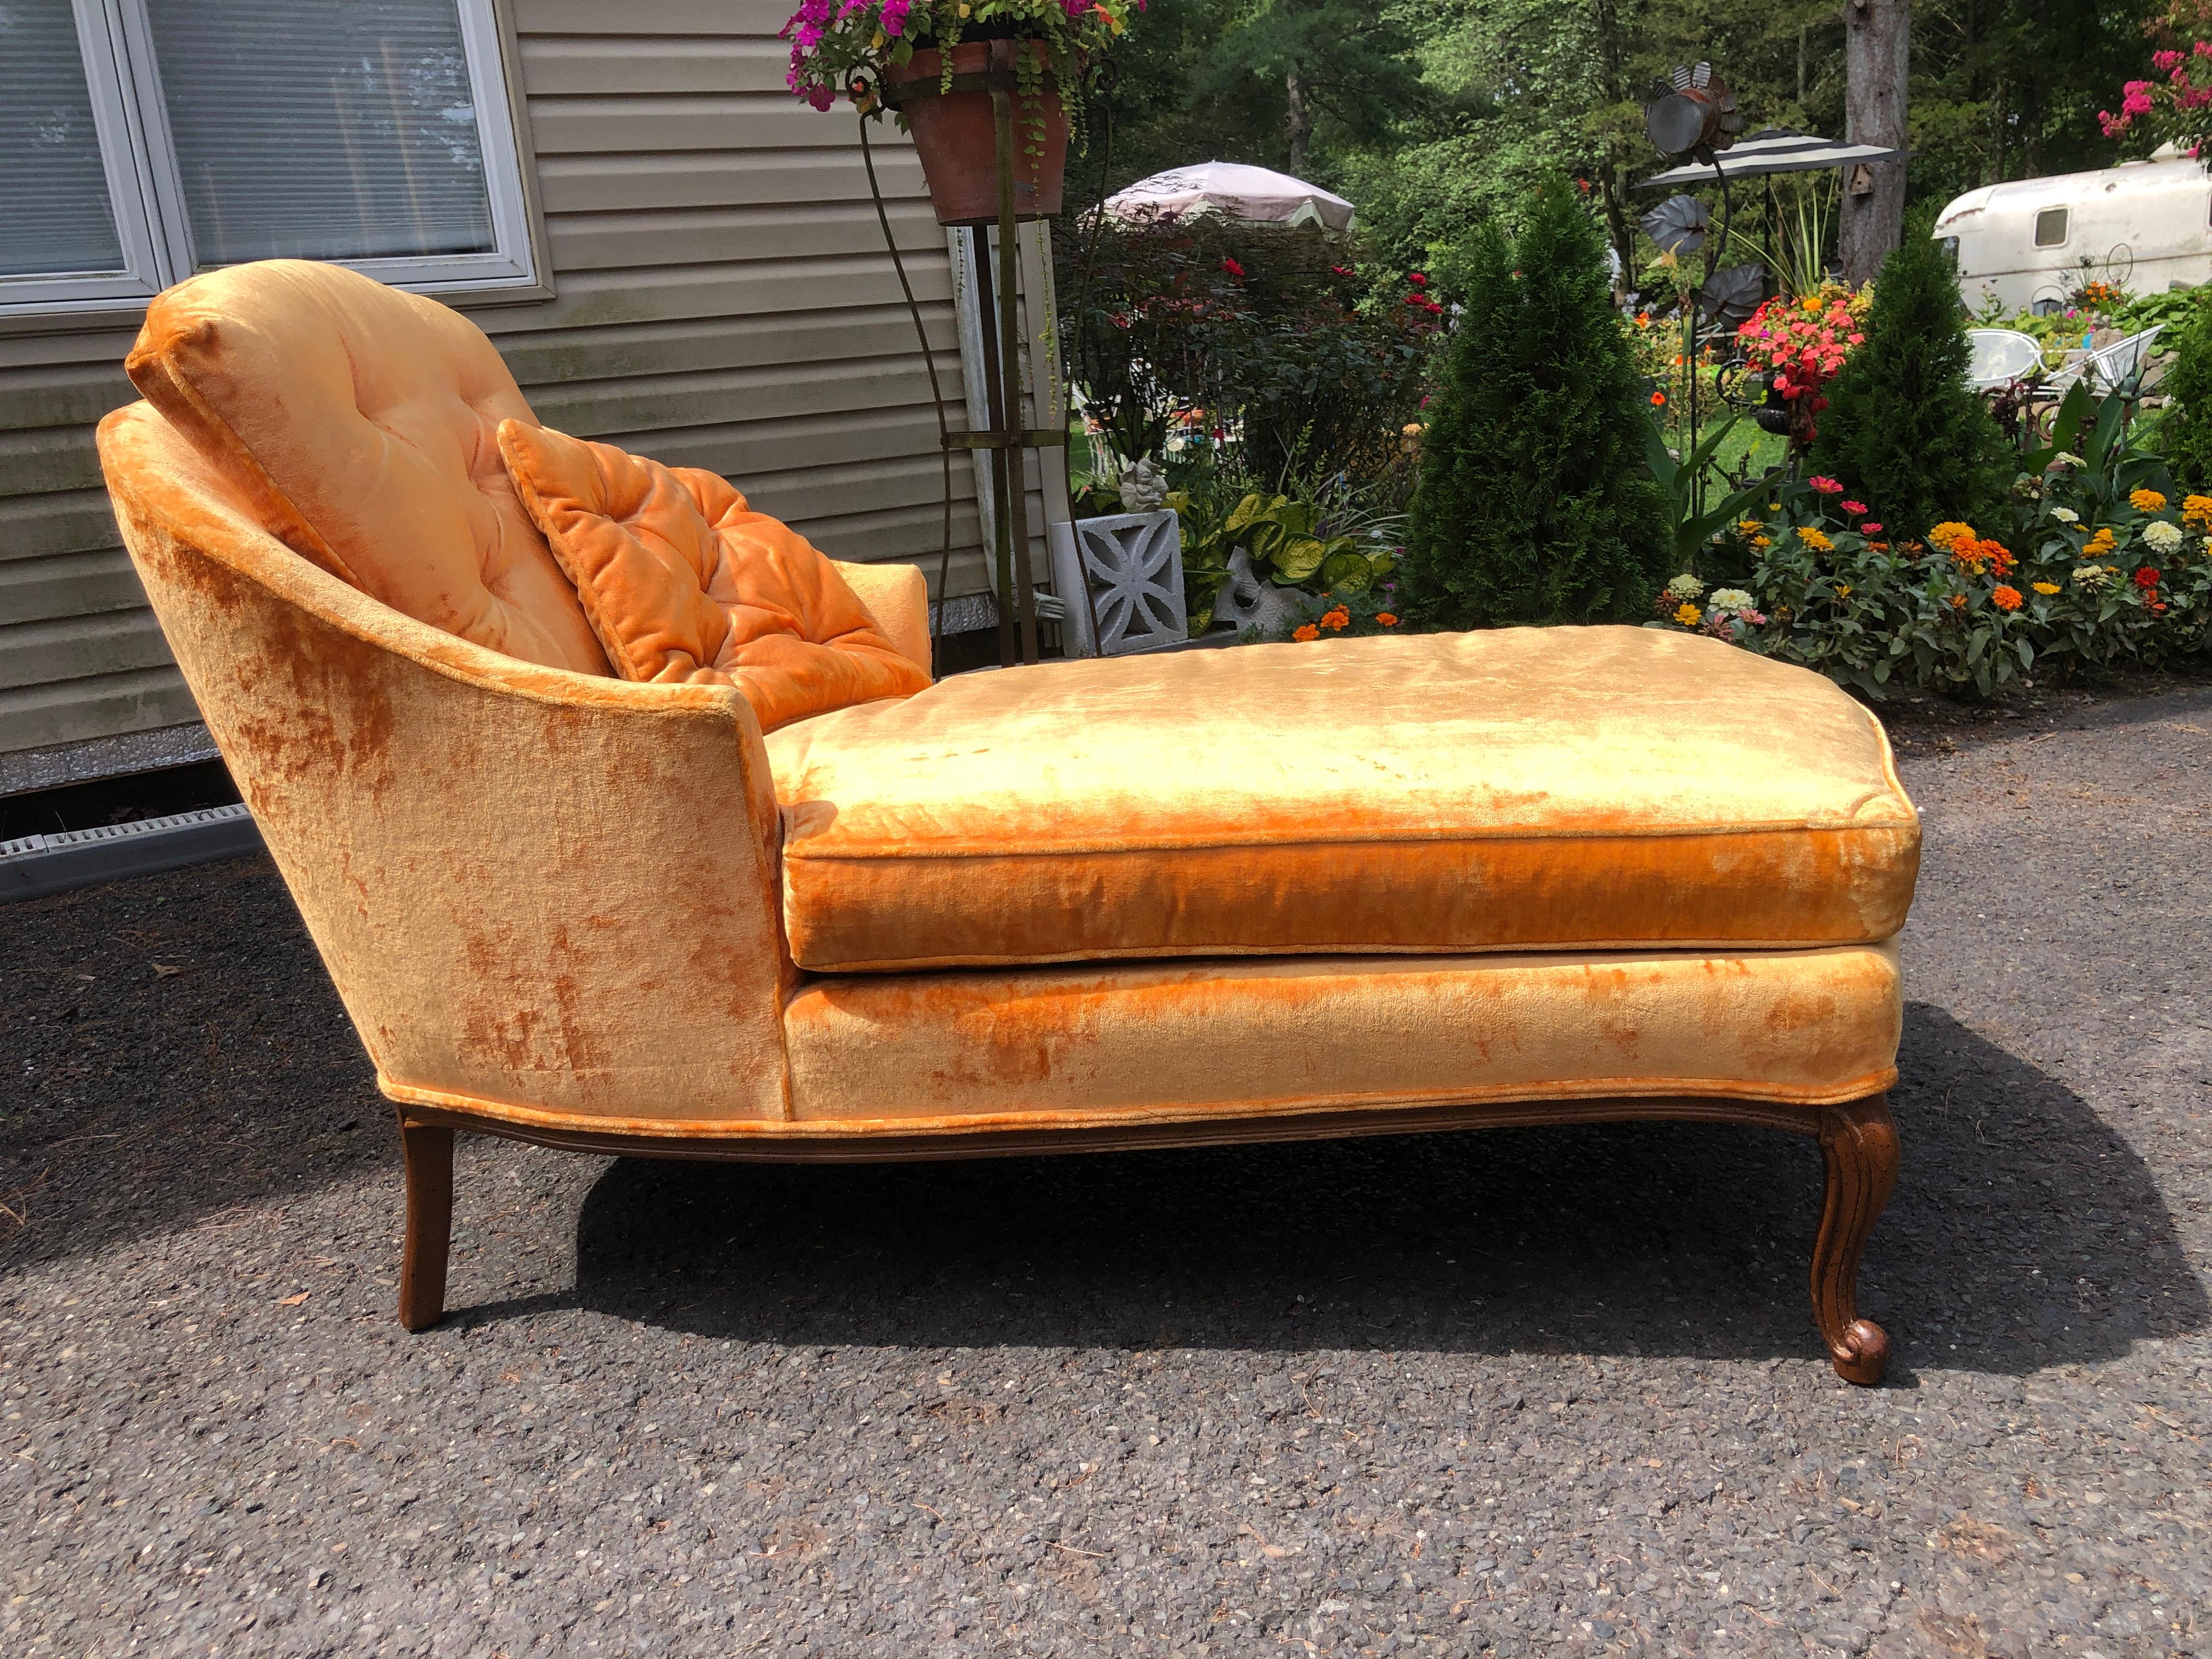 Sensational petite French Provincial upholstered Chaise Lounge.  We just love the original heavy apricot orange velvet in clean vintage condition.  Measurements: 32